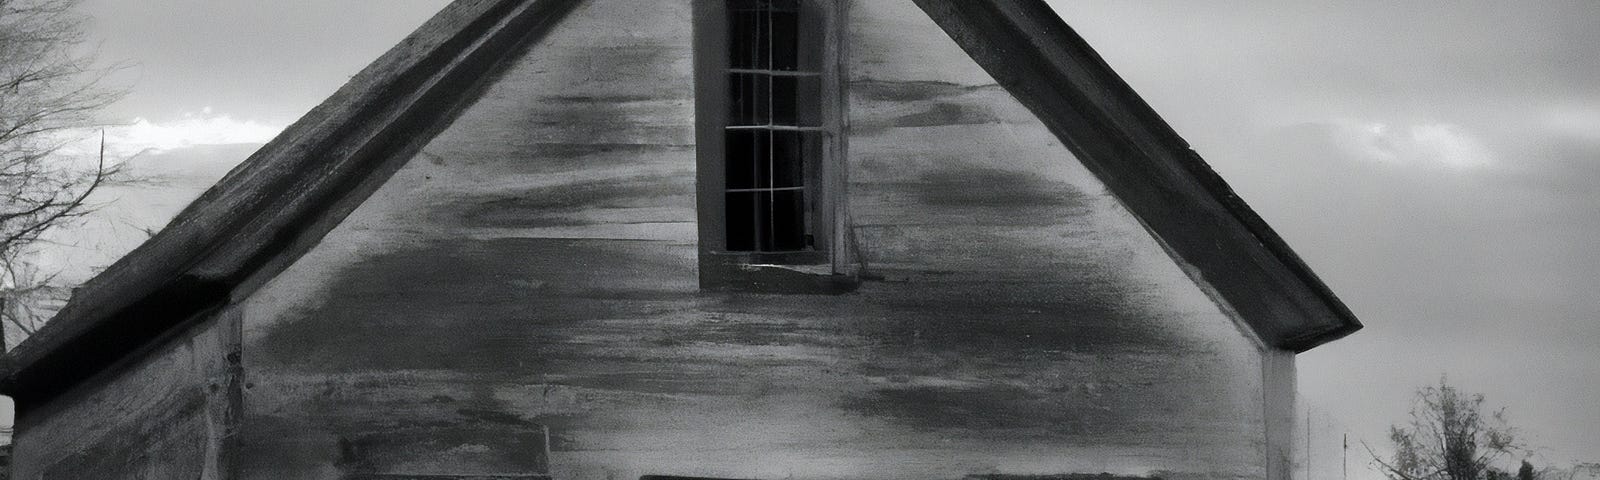 black and white image of beat up looking old house, slight sinister